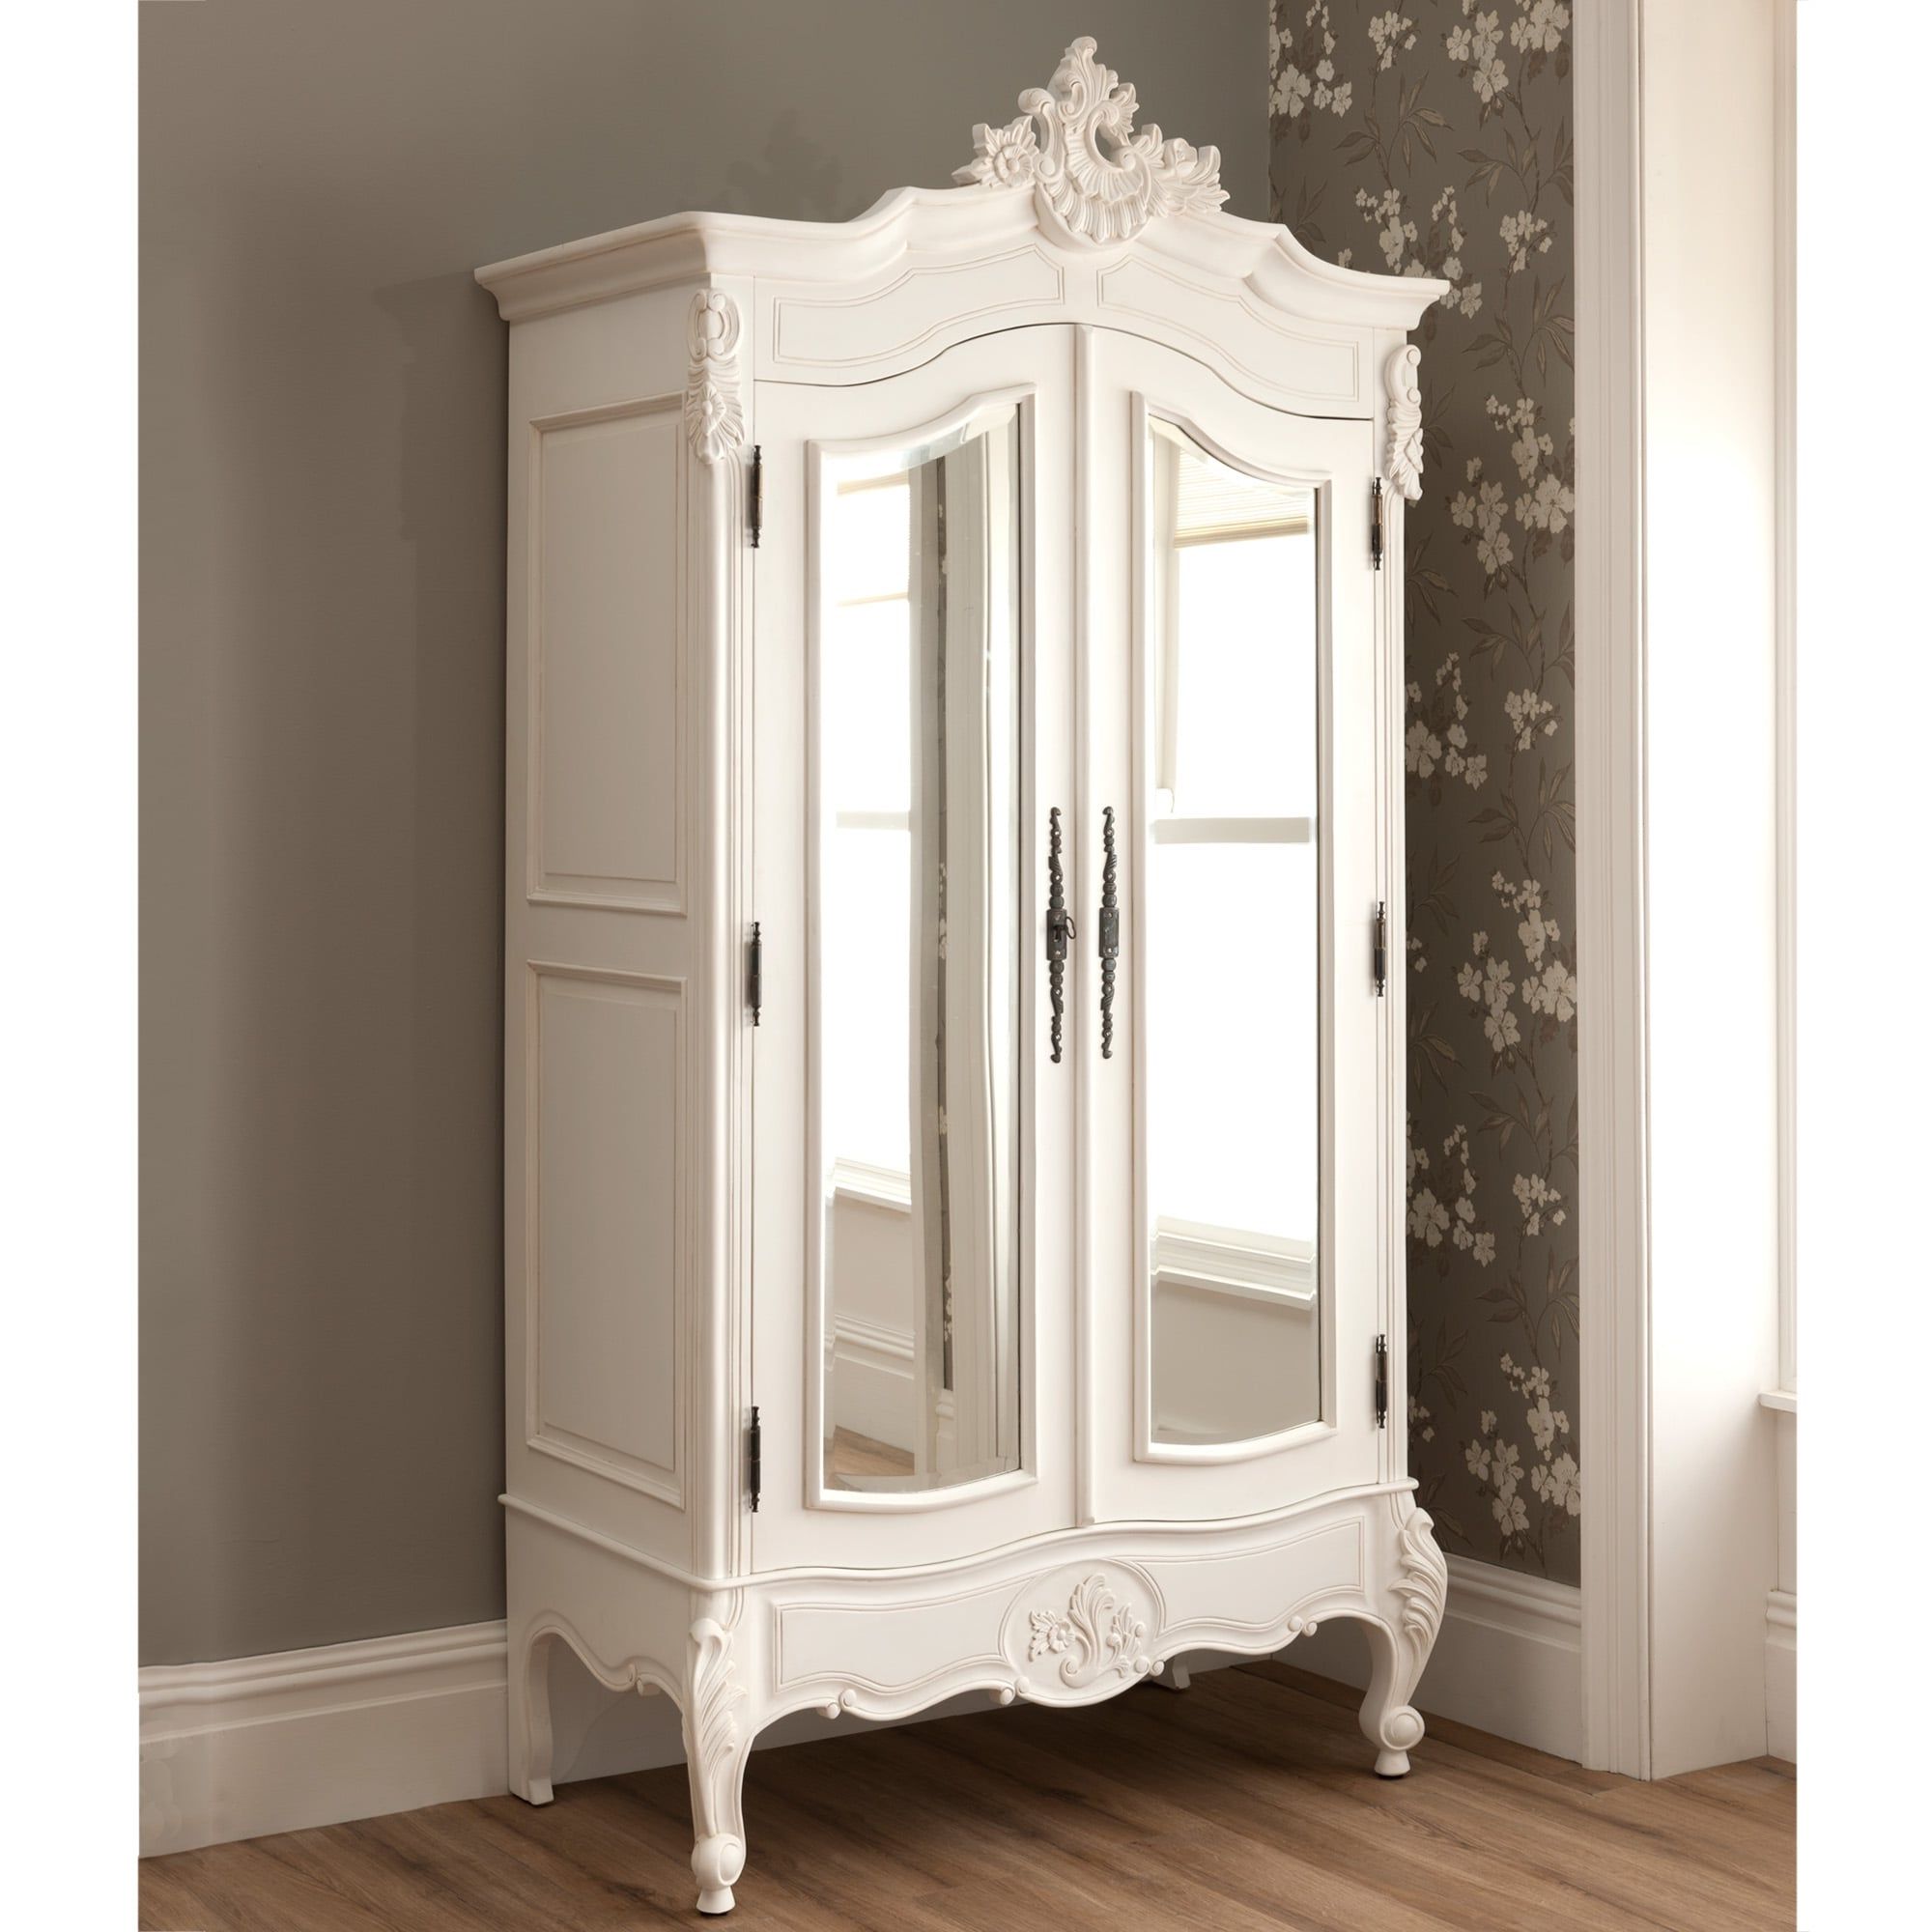 La Rochelle Antique French Mirrored 2 Door Wardrobe Within French Wardrobes For Sale (View 5 of 20)